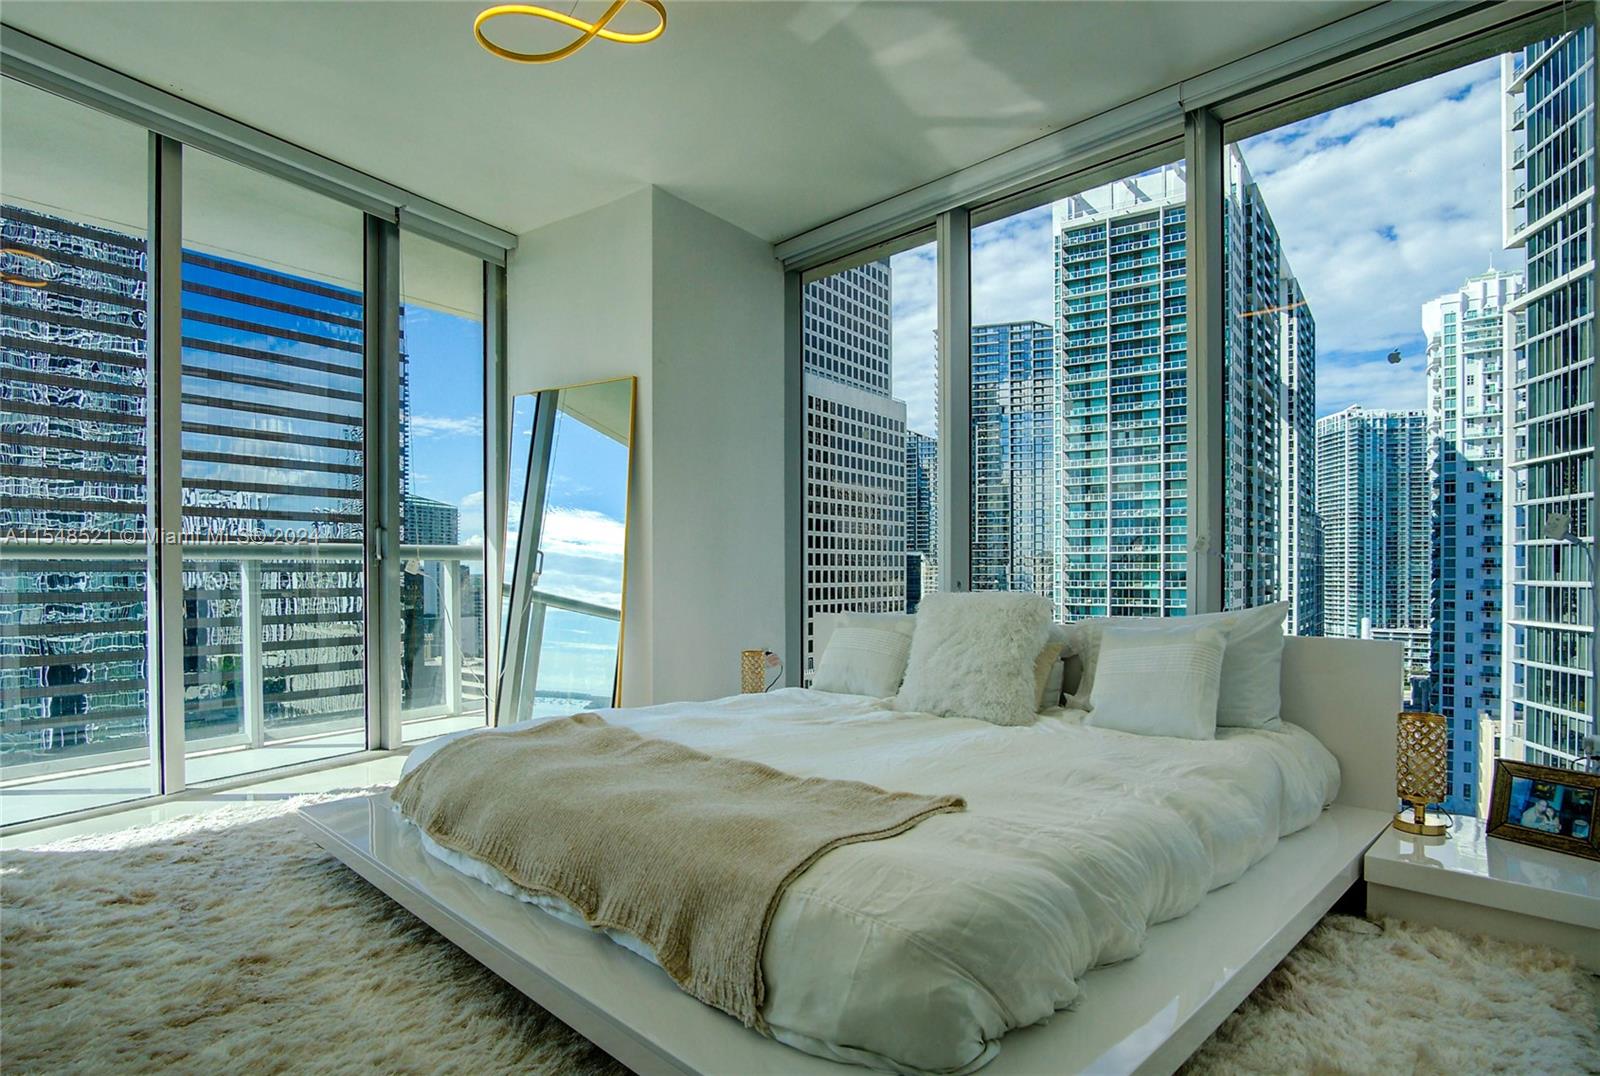 Impeccable corner unit at the highly desired Icon. Enjoy sun all day with south facing 180 degree  views of the bay and skyline, truly the best views Brickell has to offer. This 2/2 unit has a split floor where views can be seen from every room and its open concept allows for natural light throughout. Live in it yourself or purchase as an investment! This unit has consistently set the market price in Icon renting thousands of dollars higher than the comparables for the last two years. Currently rented to highly qualified tenants. The Icon is a full amenity building offering a world class gym, spa, pool with towel & drink service, and onsite top tier restaurants such as Cipriani and Catina La Veinte.